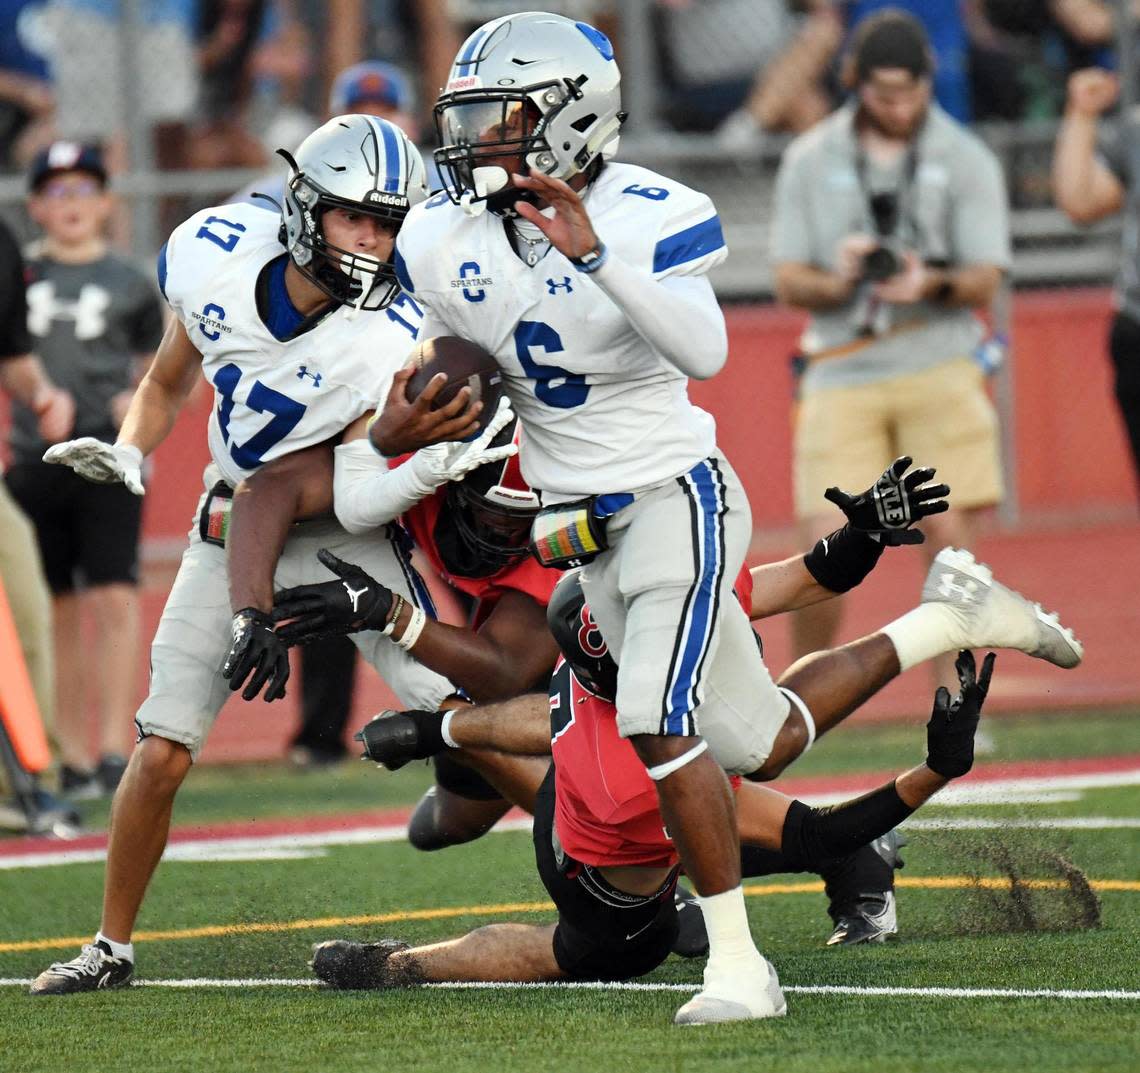 Centenial Quarterback Phillip Hamilton, center escapes Burleson’s Kalun Blair as he scrambles for a touchdown to take a 1`4-0 lead in the first quarter during Friday’s, August 26, 2022 football game at Elk Stadium in Burleson, Texas. Special/Bob Haynes